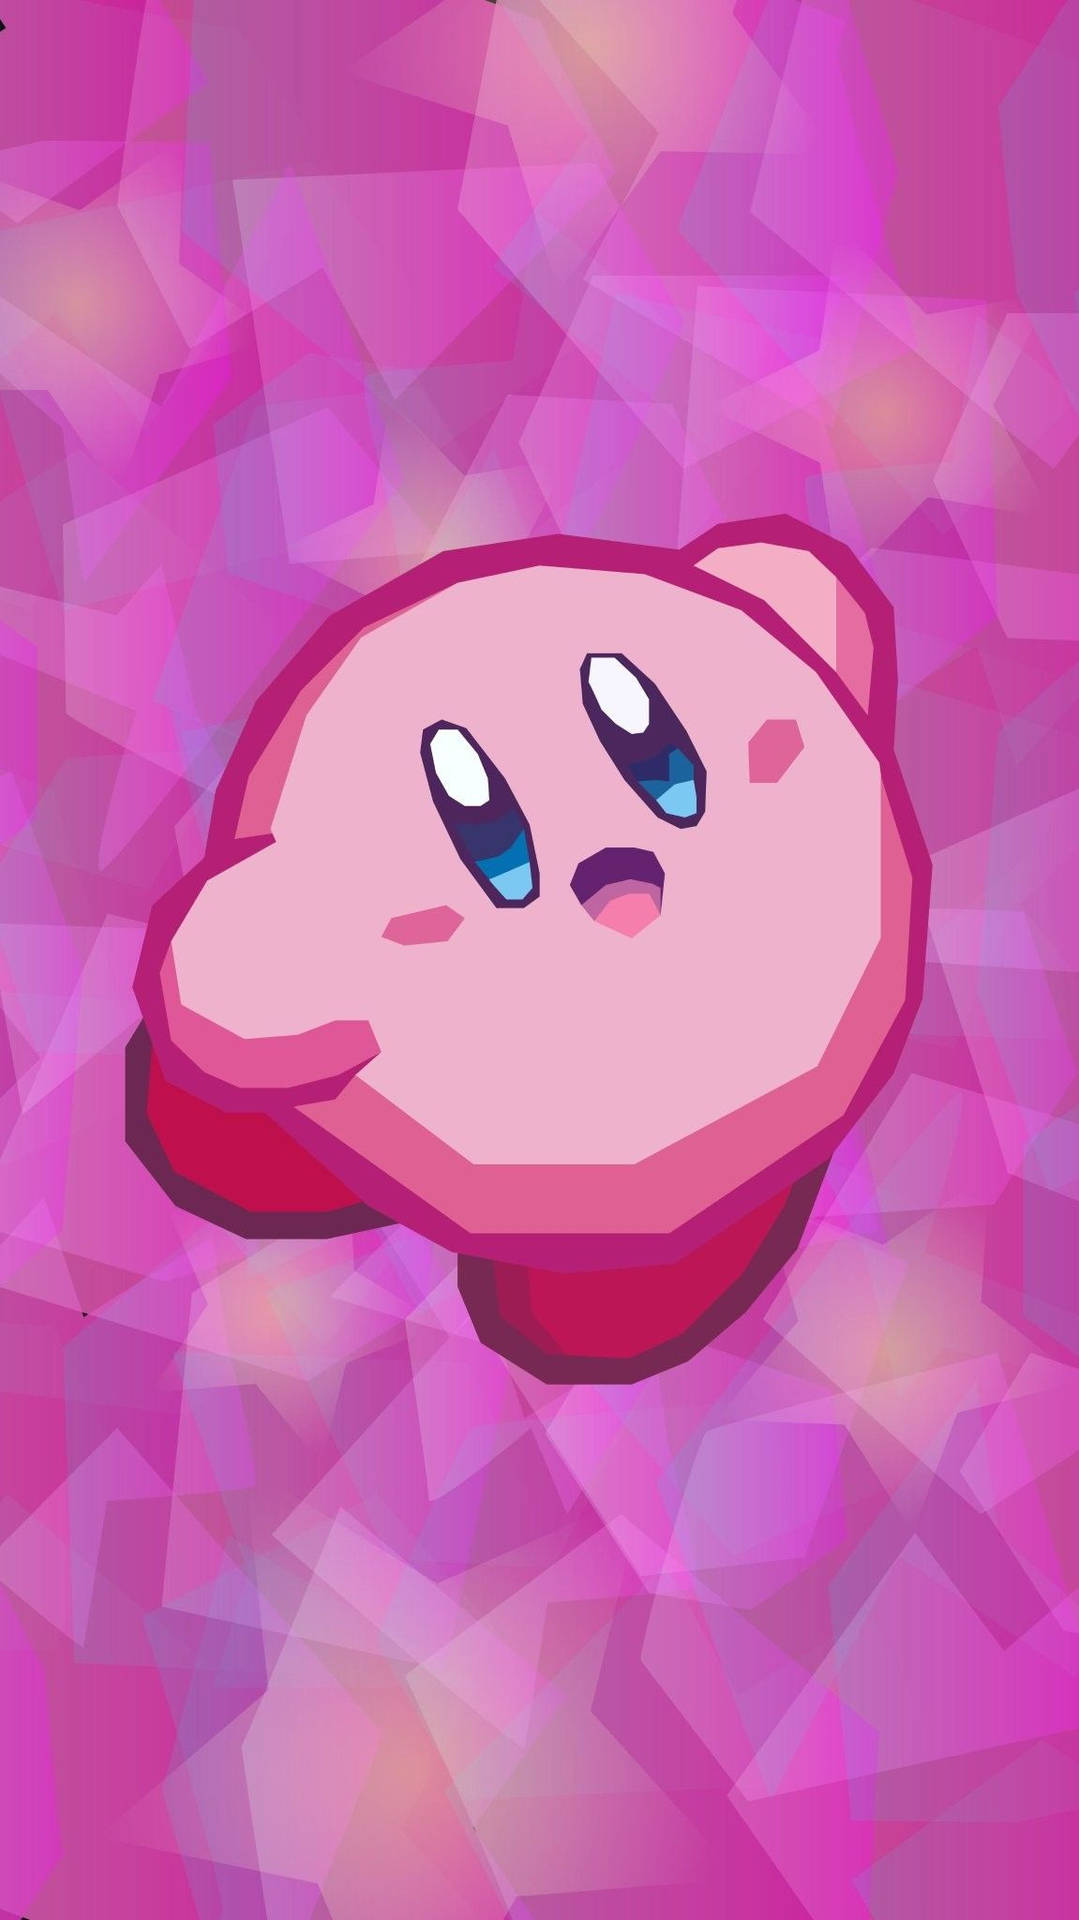 Dive into the fun and colorful world of Kirby Wallpaper